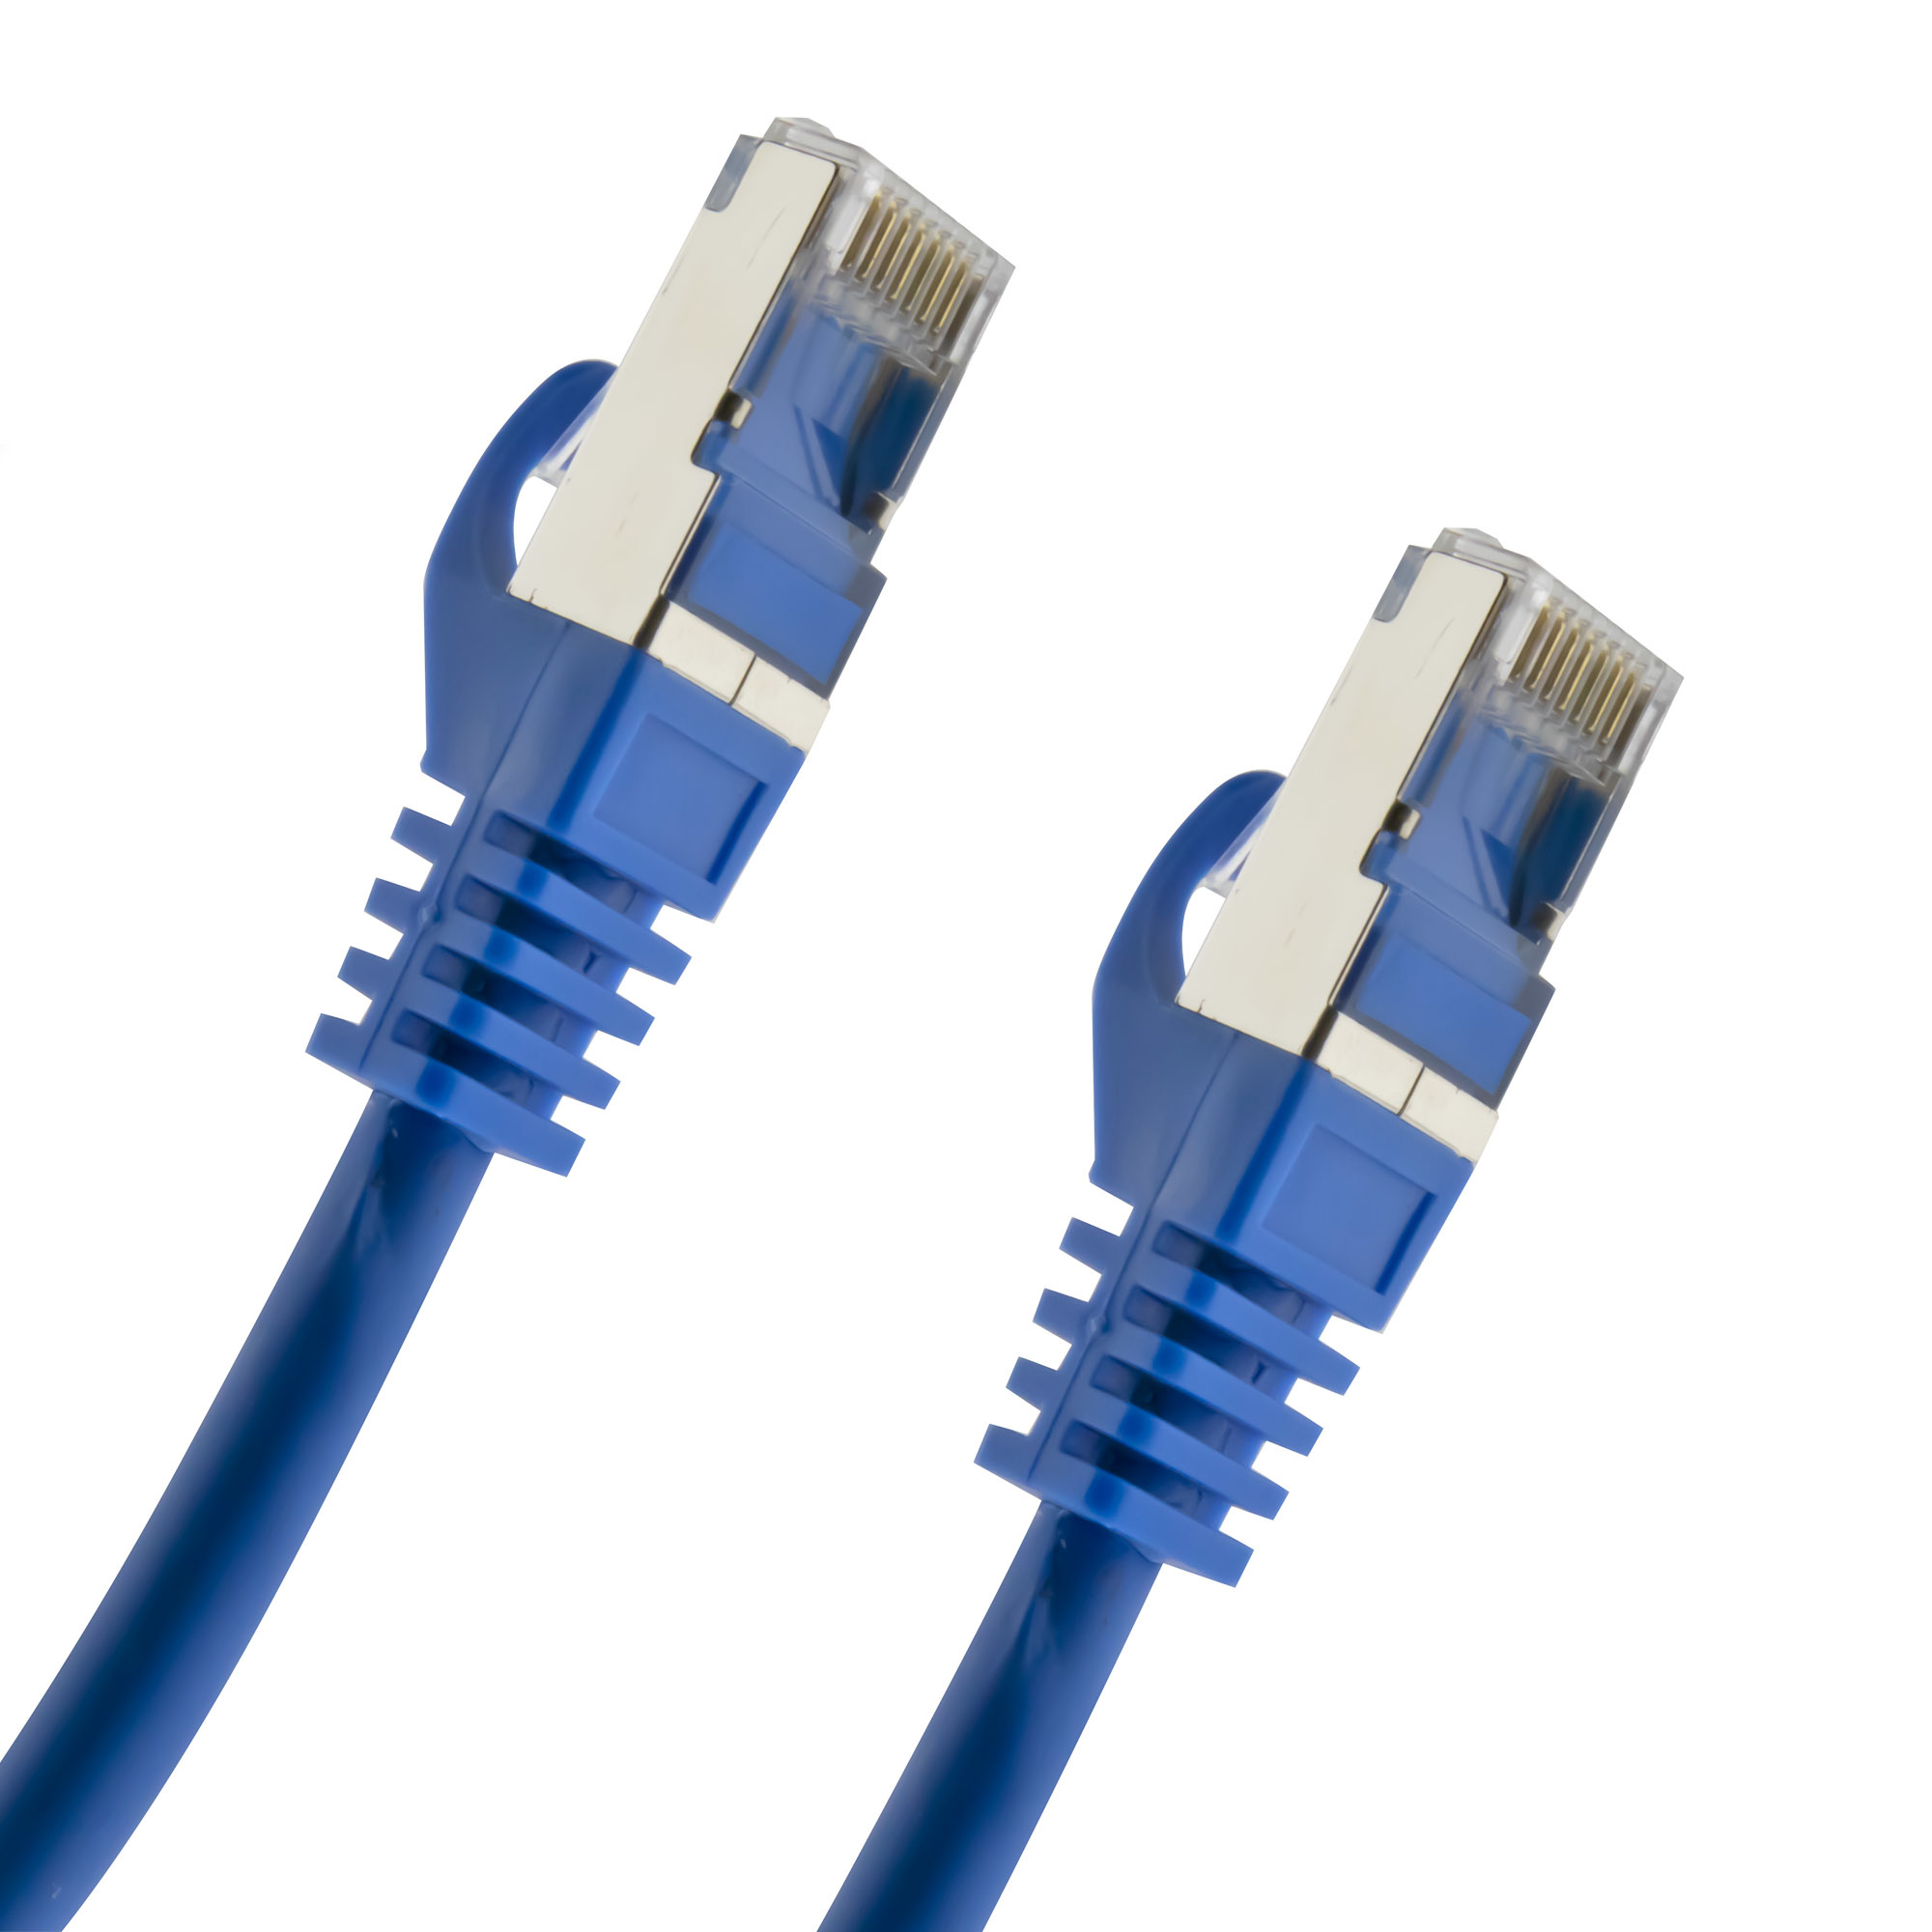 Network cable Cat. 7 S/FTP PIMF 1.00 meter blue